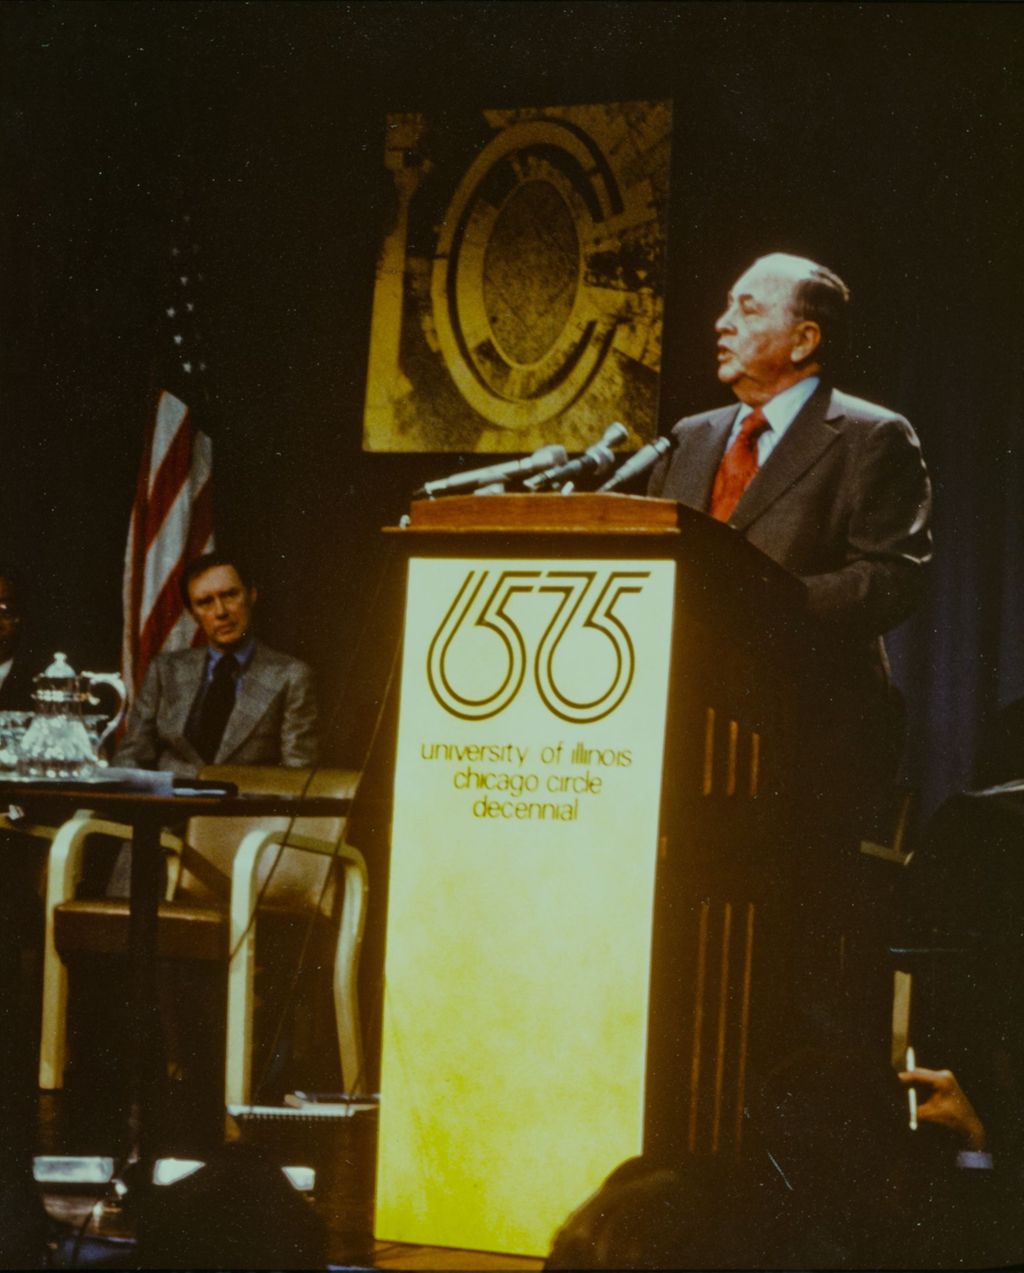 Miniature of Mayor Richard J. Daley speaking at the Decennial Ceremony